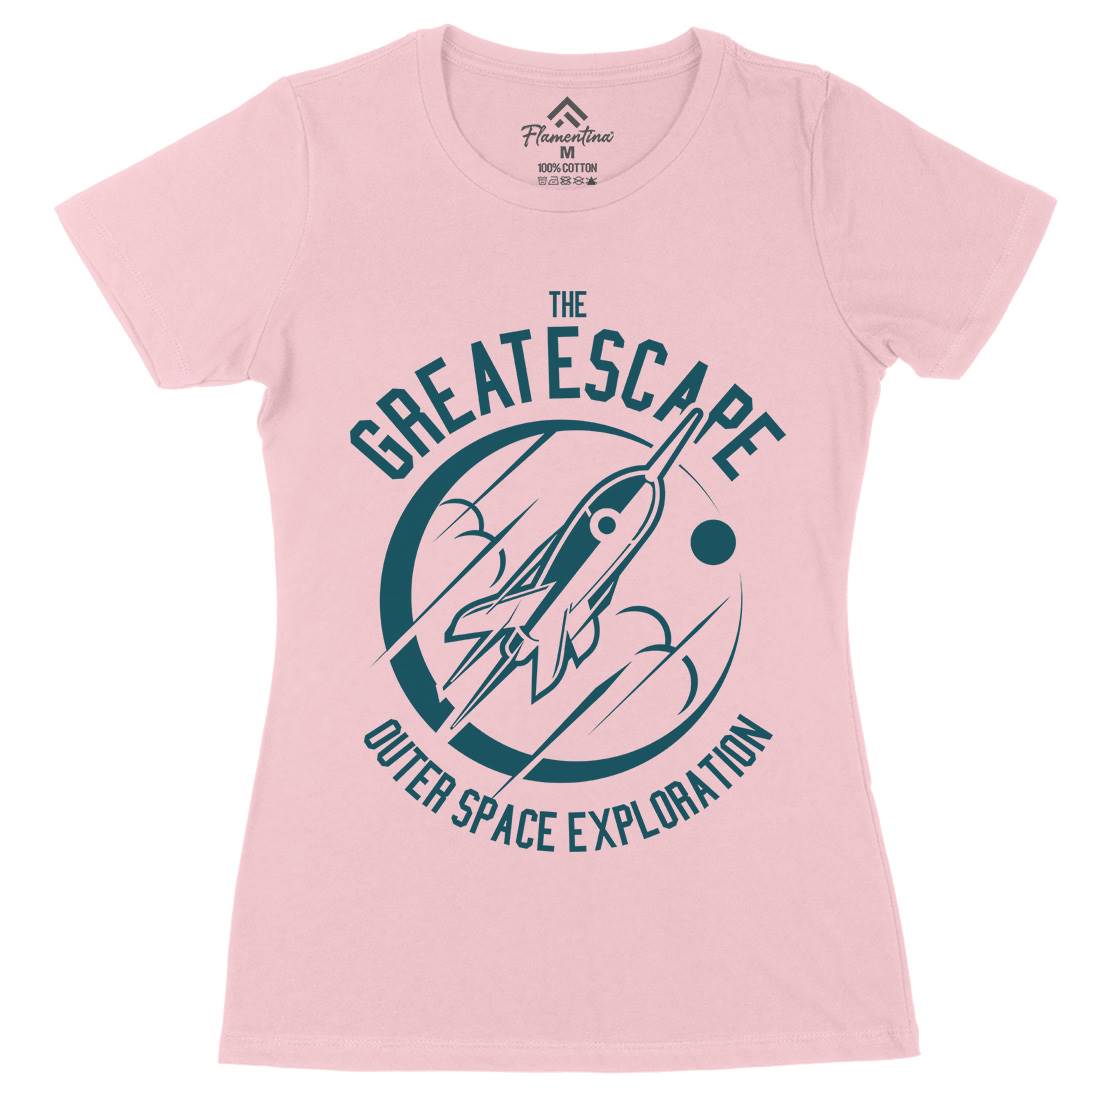 Great Escape Womens Organic Crew Neck T-Shirt Space A292